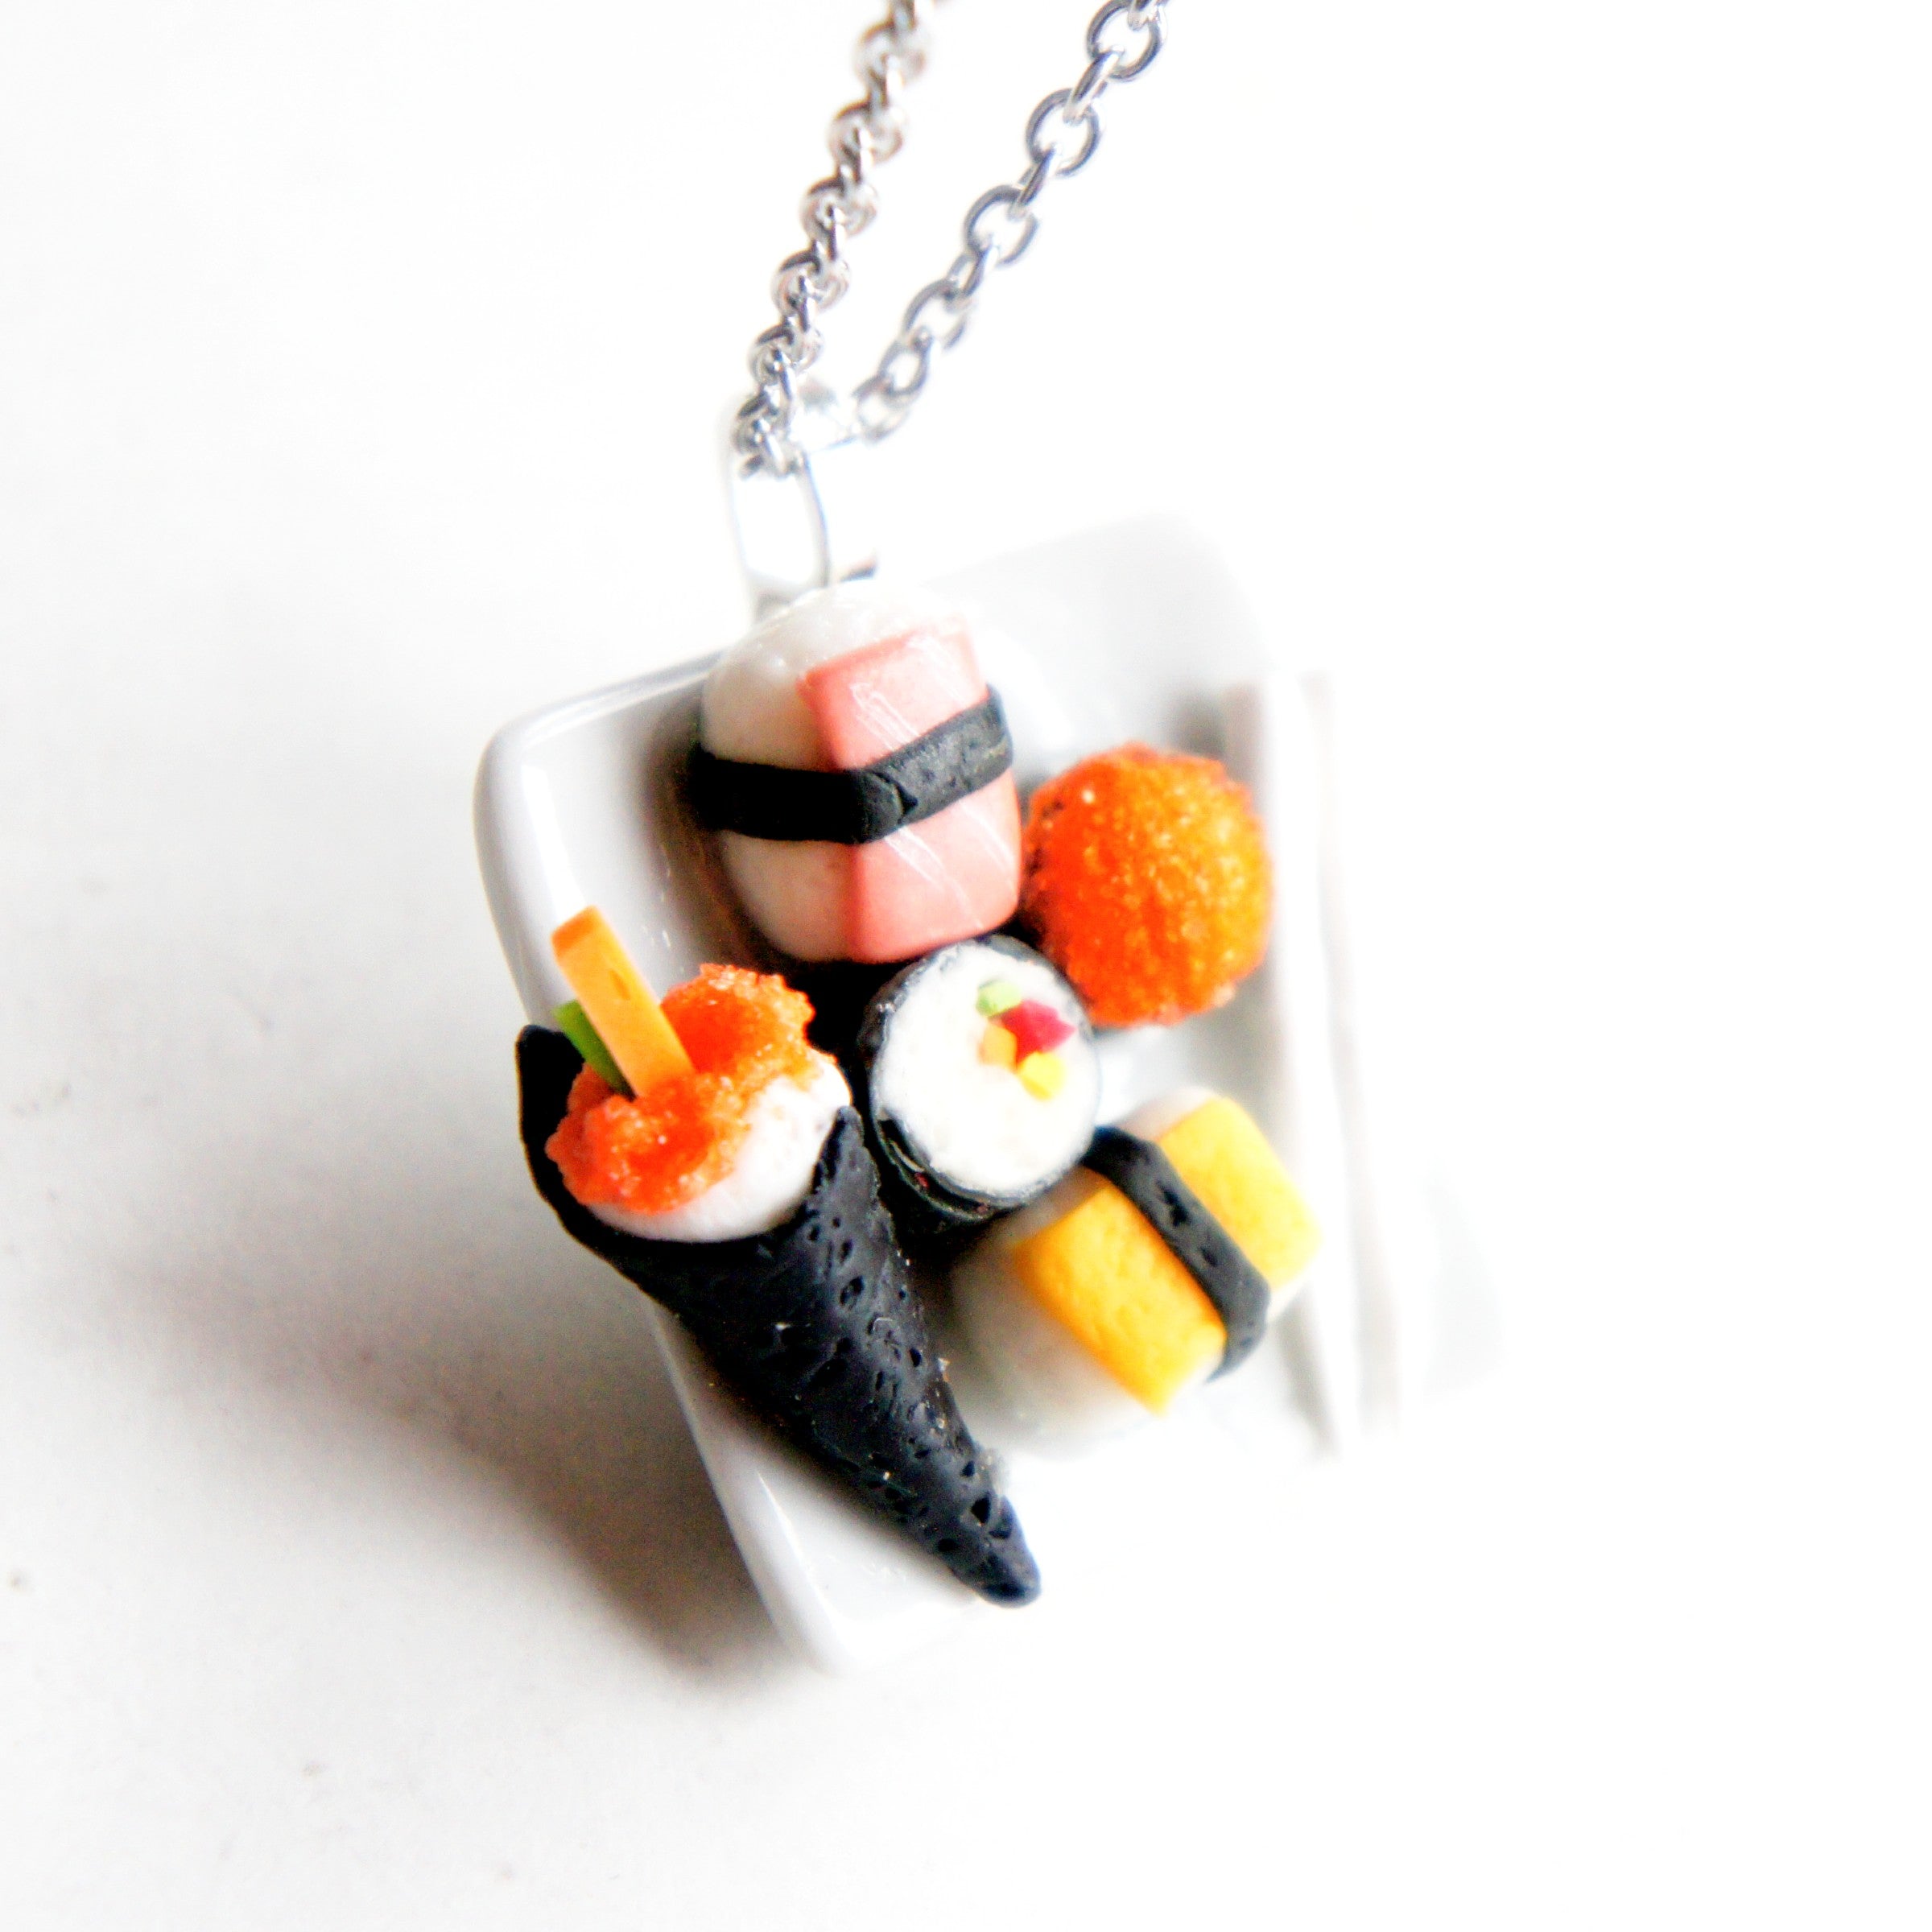 Sushi Plate Necklace - Jillicious charms and accessories